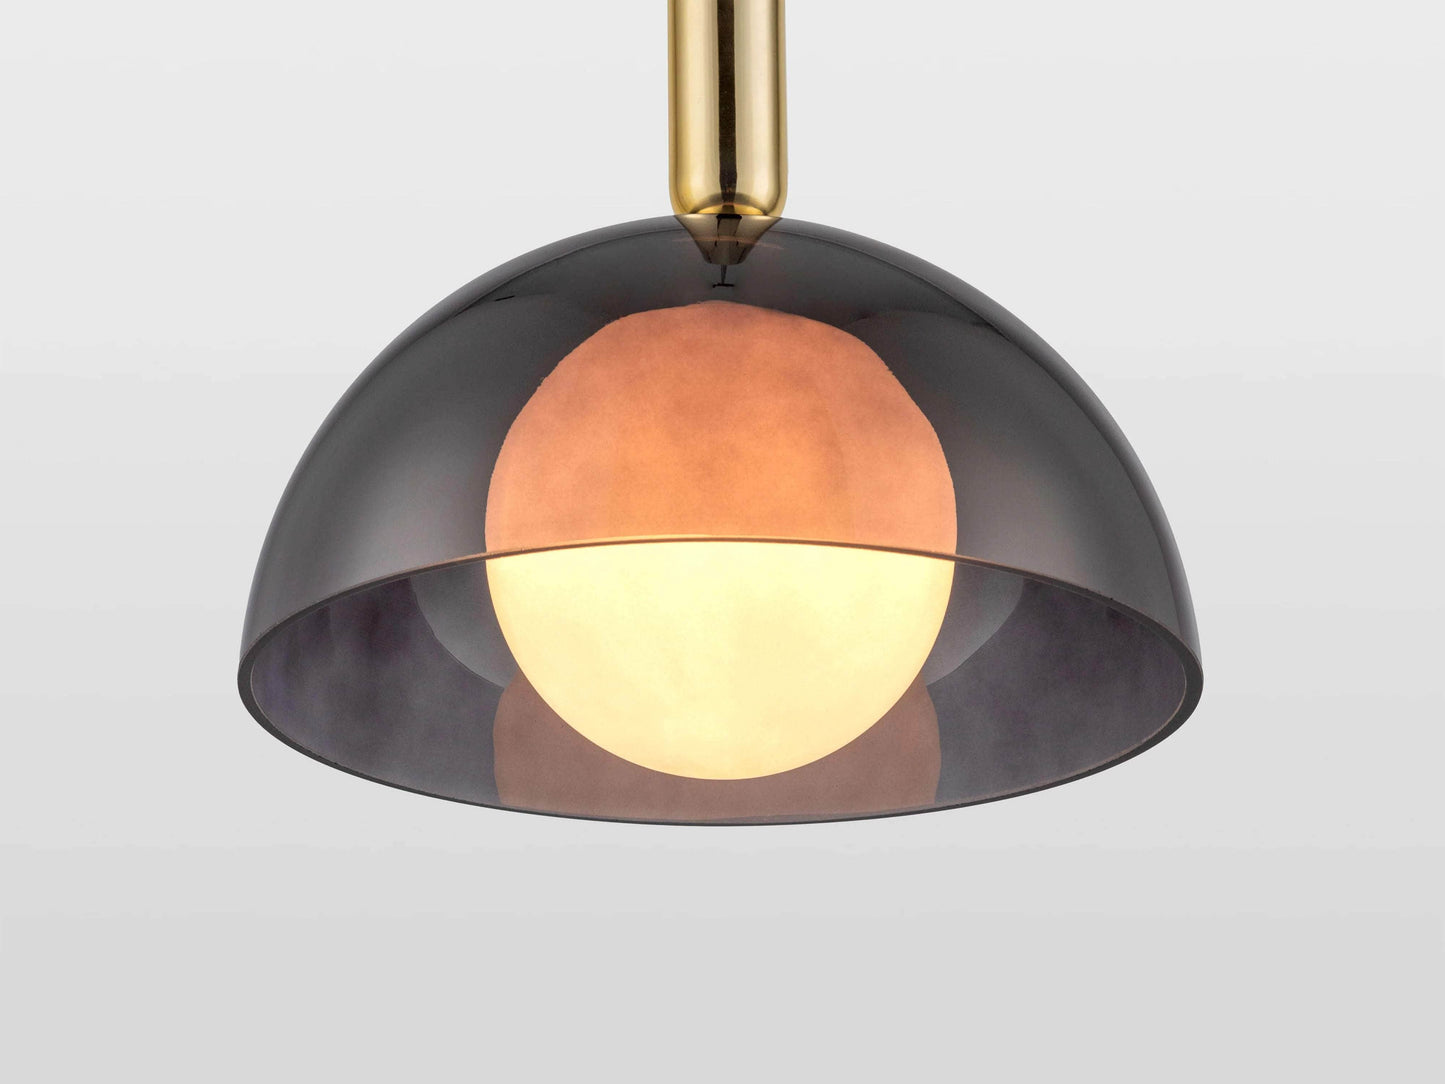 Charcoal grey glass dome ceiling light